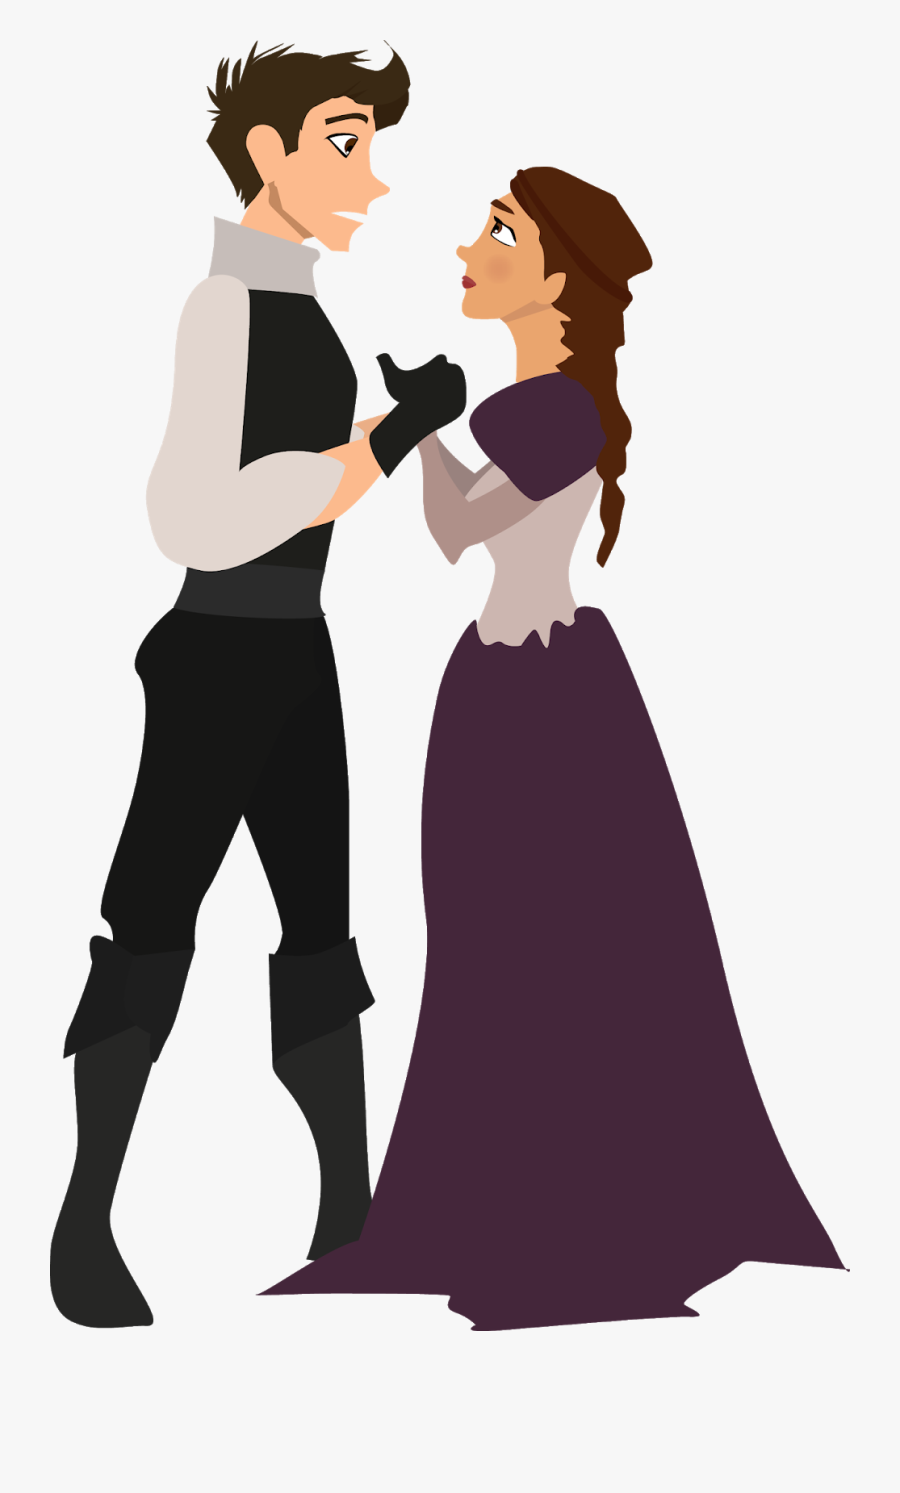 Romeo And Juliet Clipart, Transparent Clipart